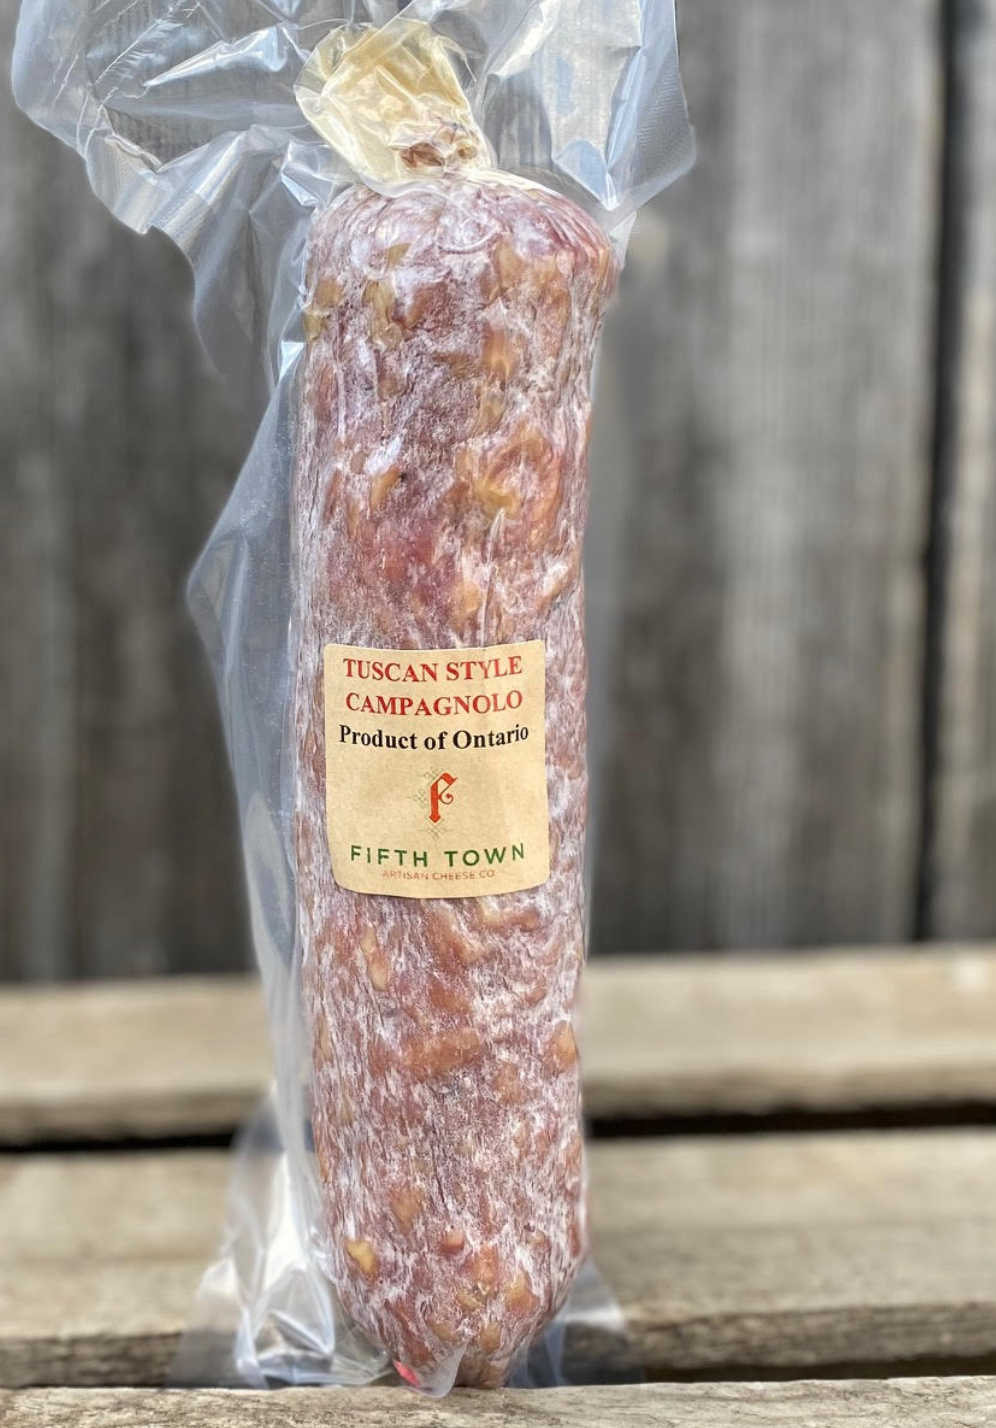 Fifth Town - Tuscan Style Campagnolo Salami - 300g